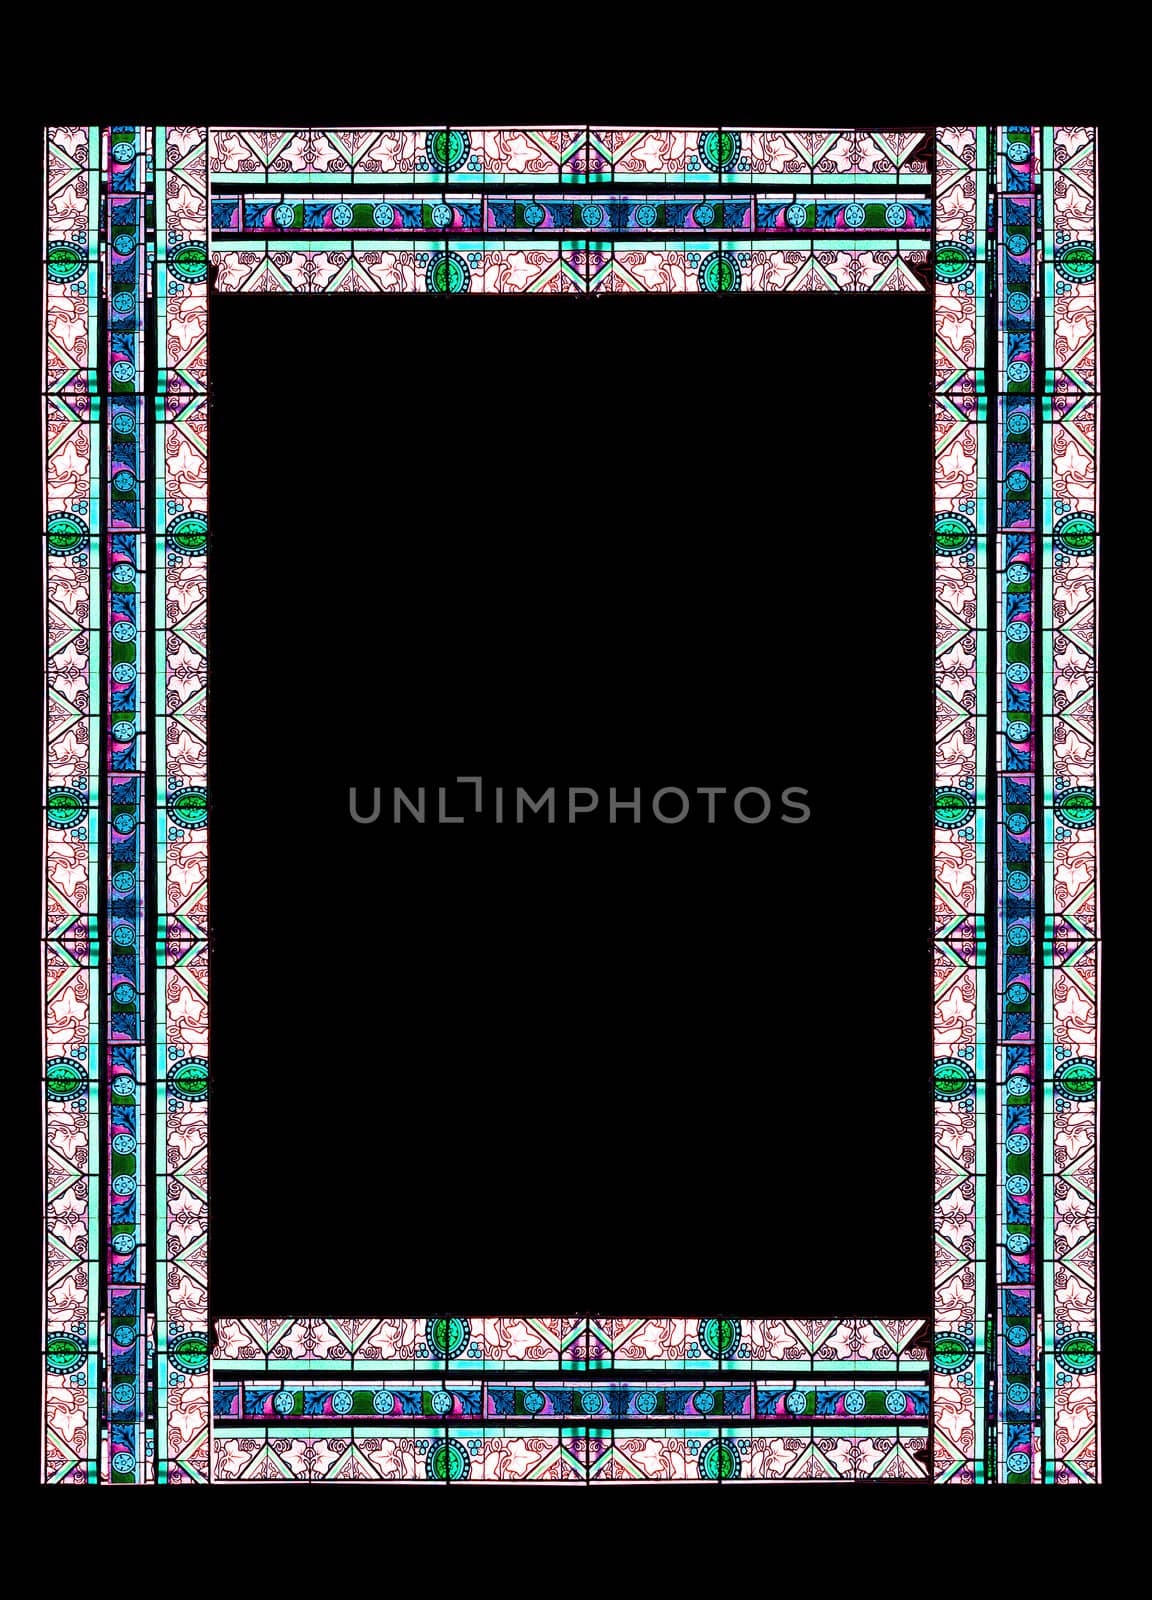 Border made of stained glass with floral motifs with clipping pa by cristiaciobanu